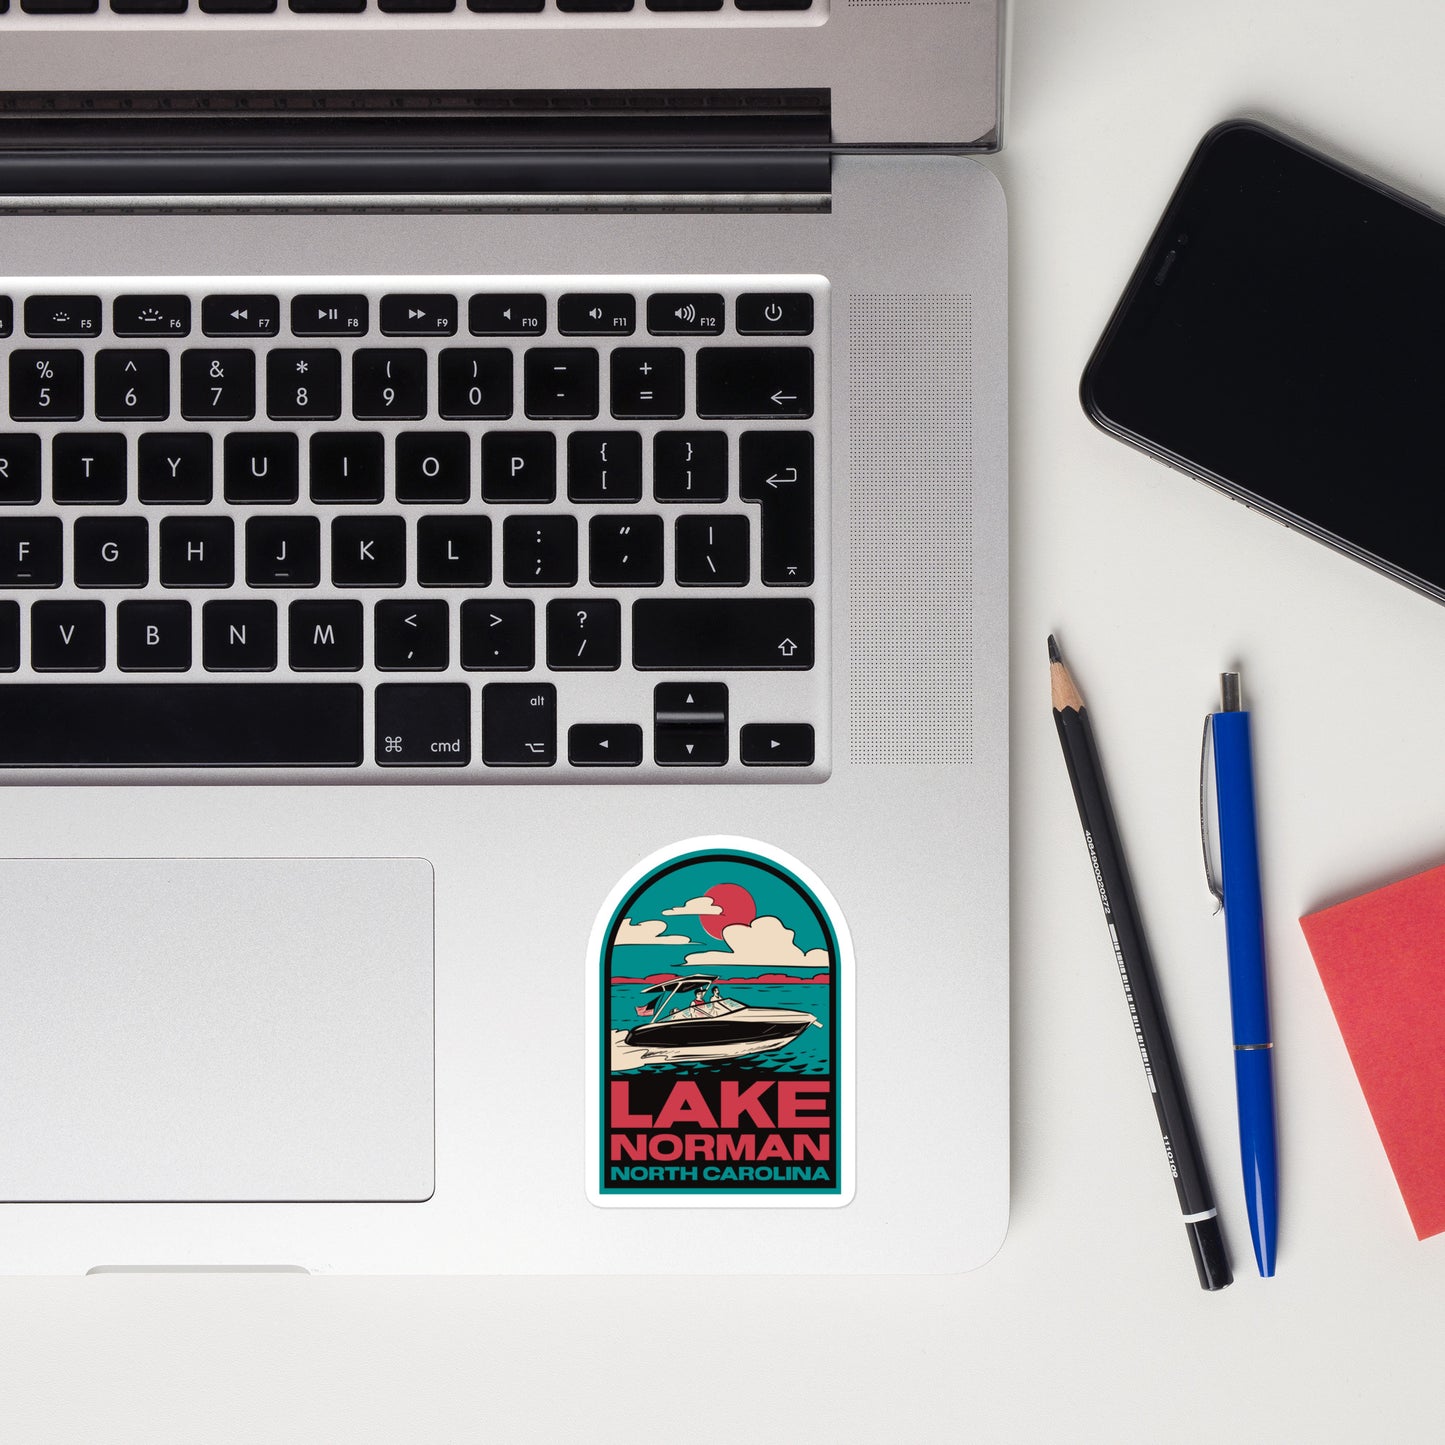 A sticker of Lake Norman NC on a laptop